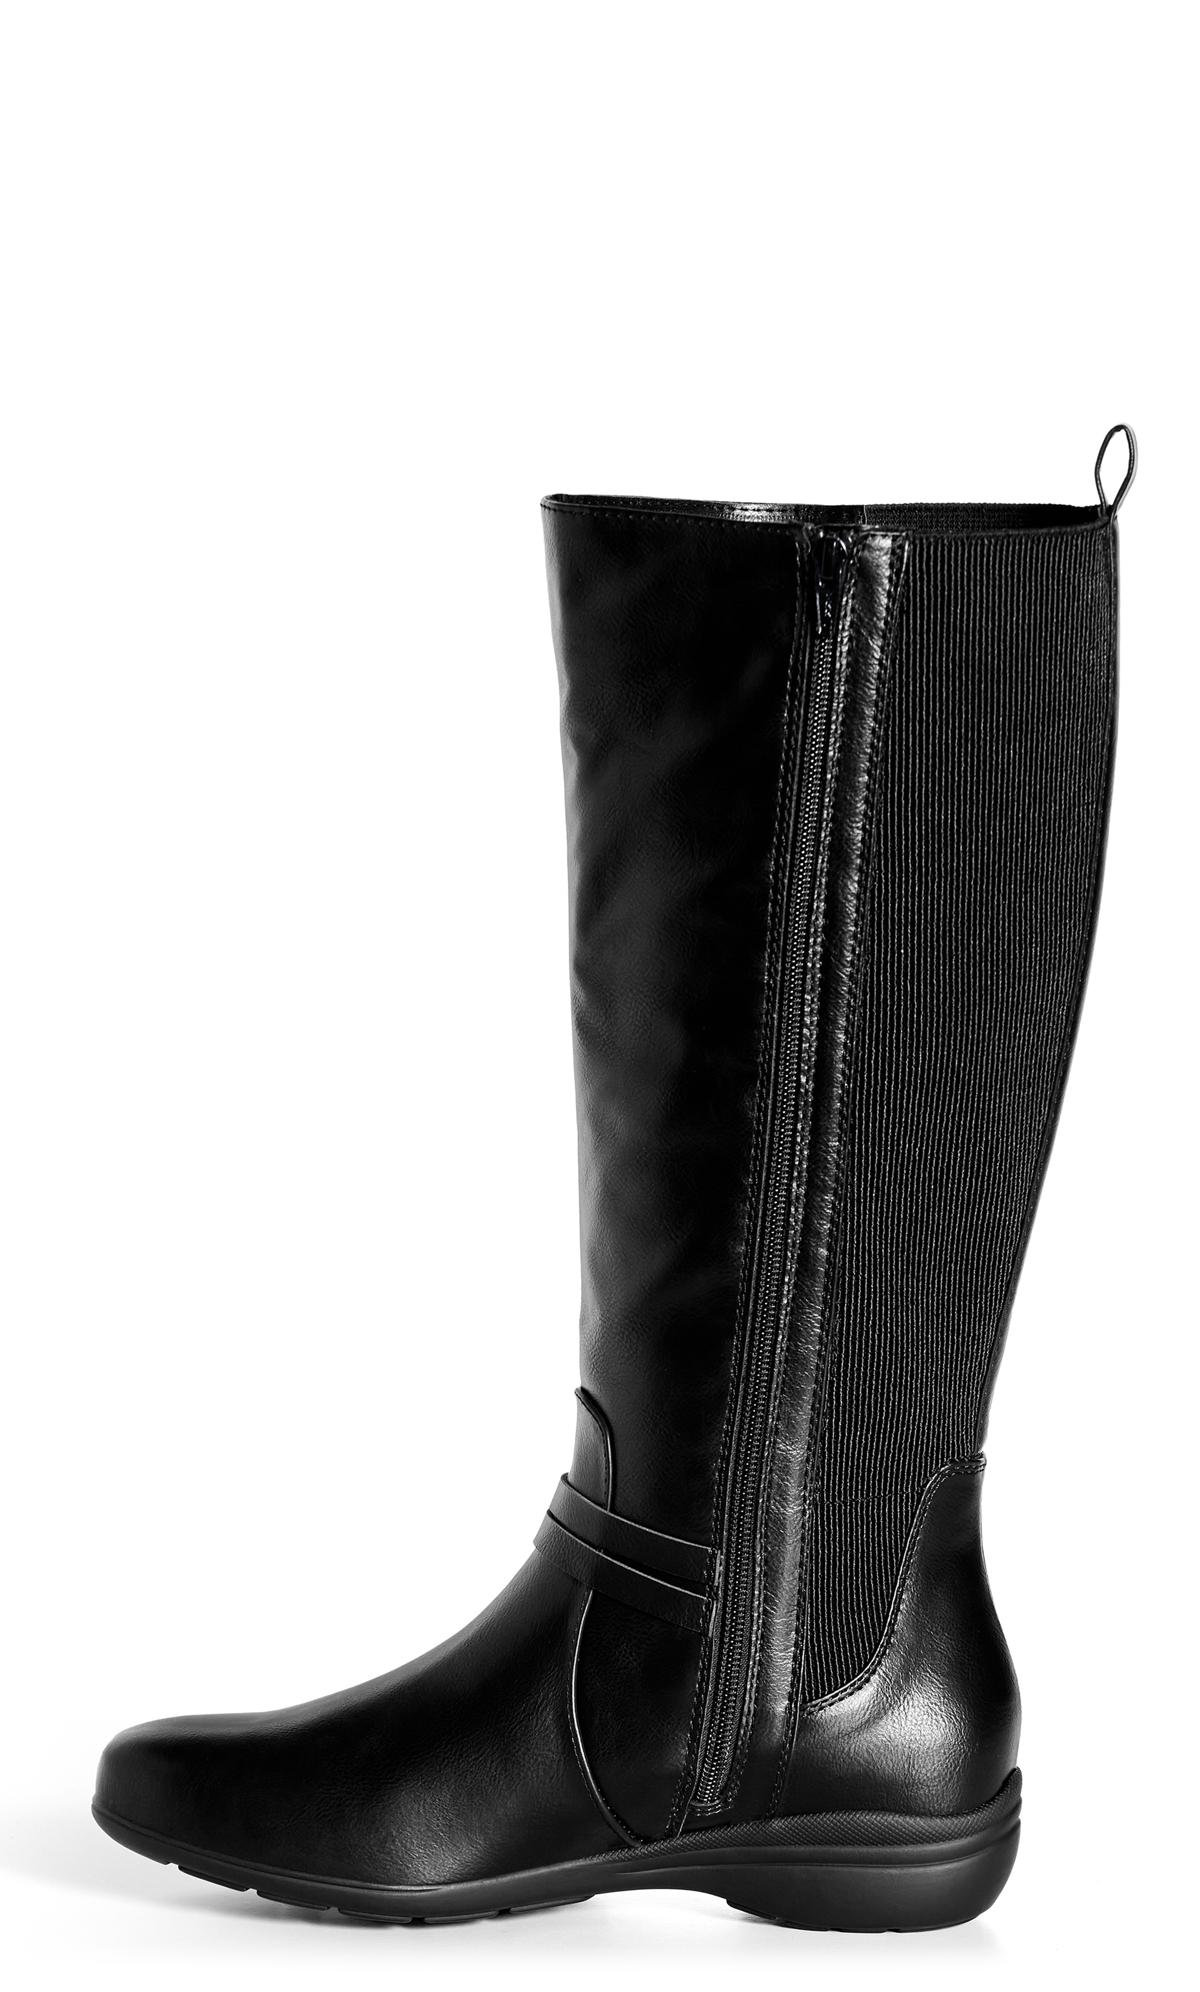 Evans Black Faux Leather Knee High Boots 3